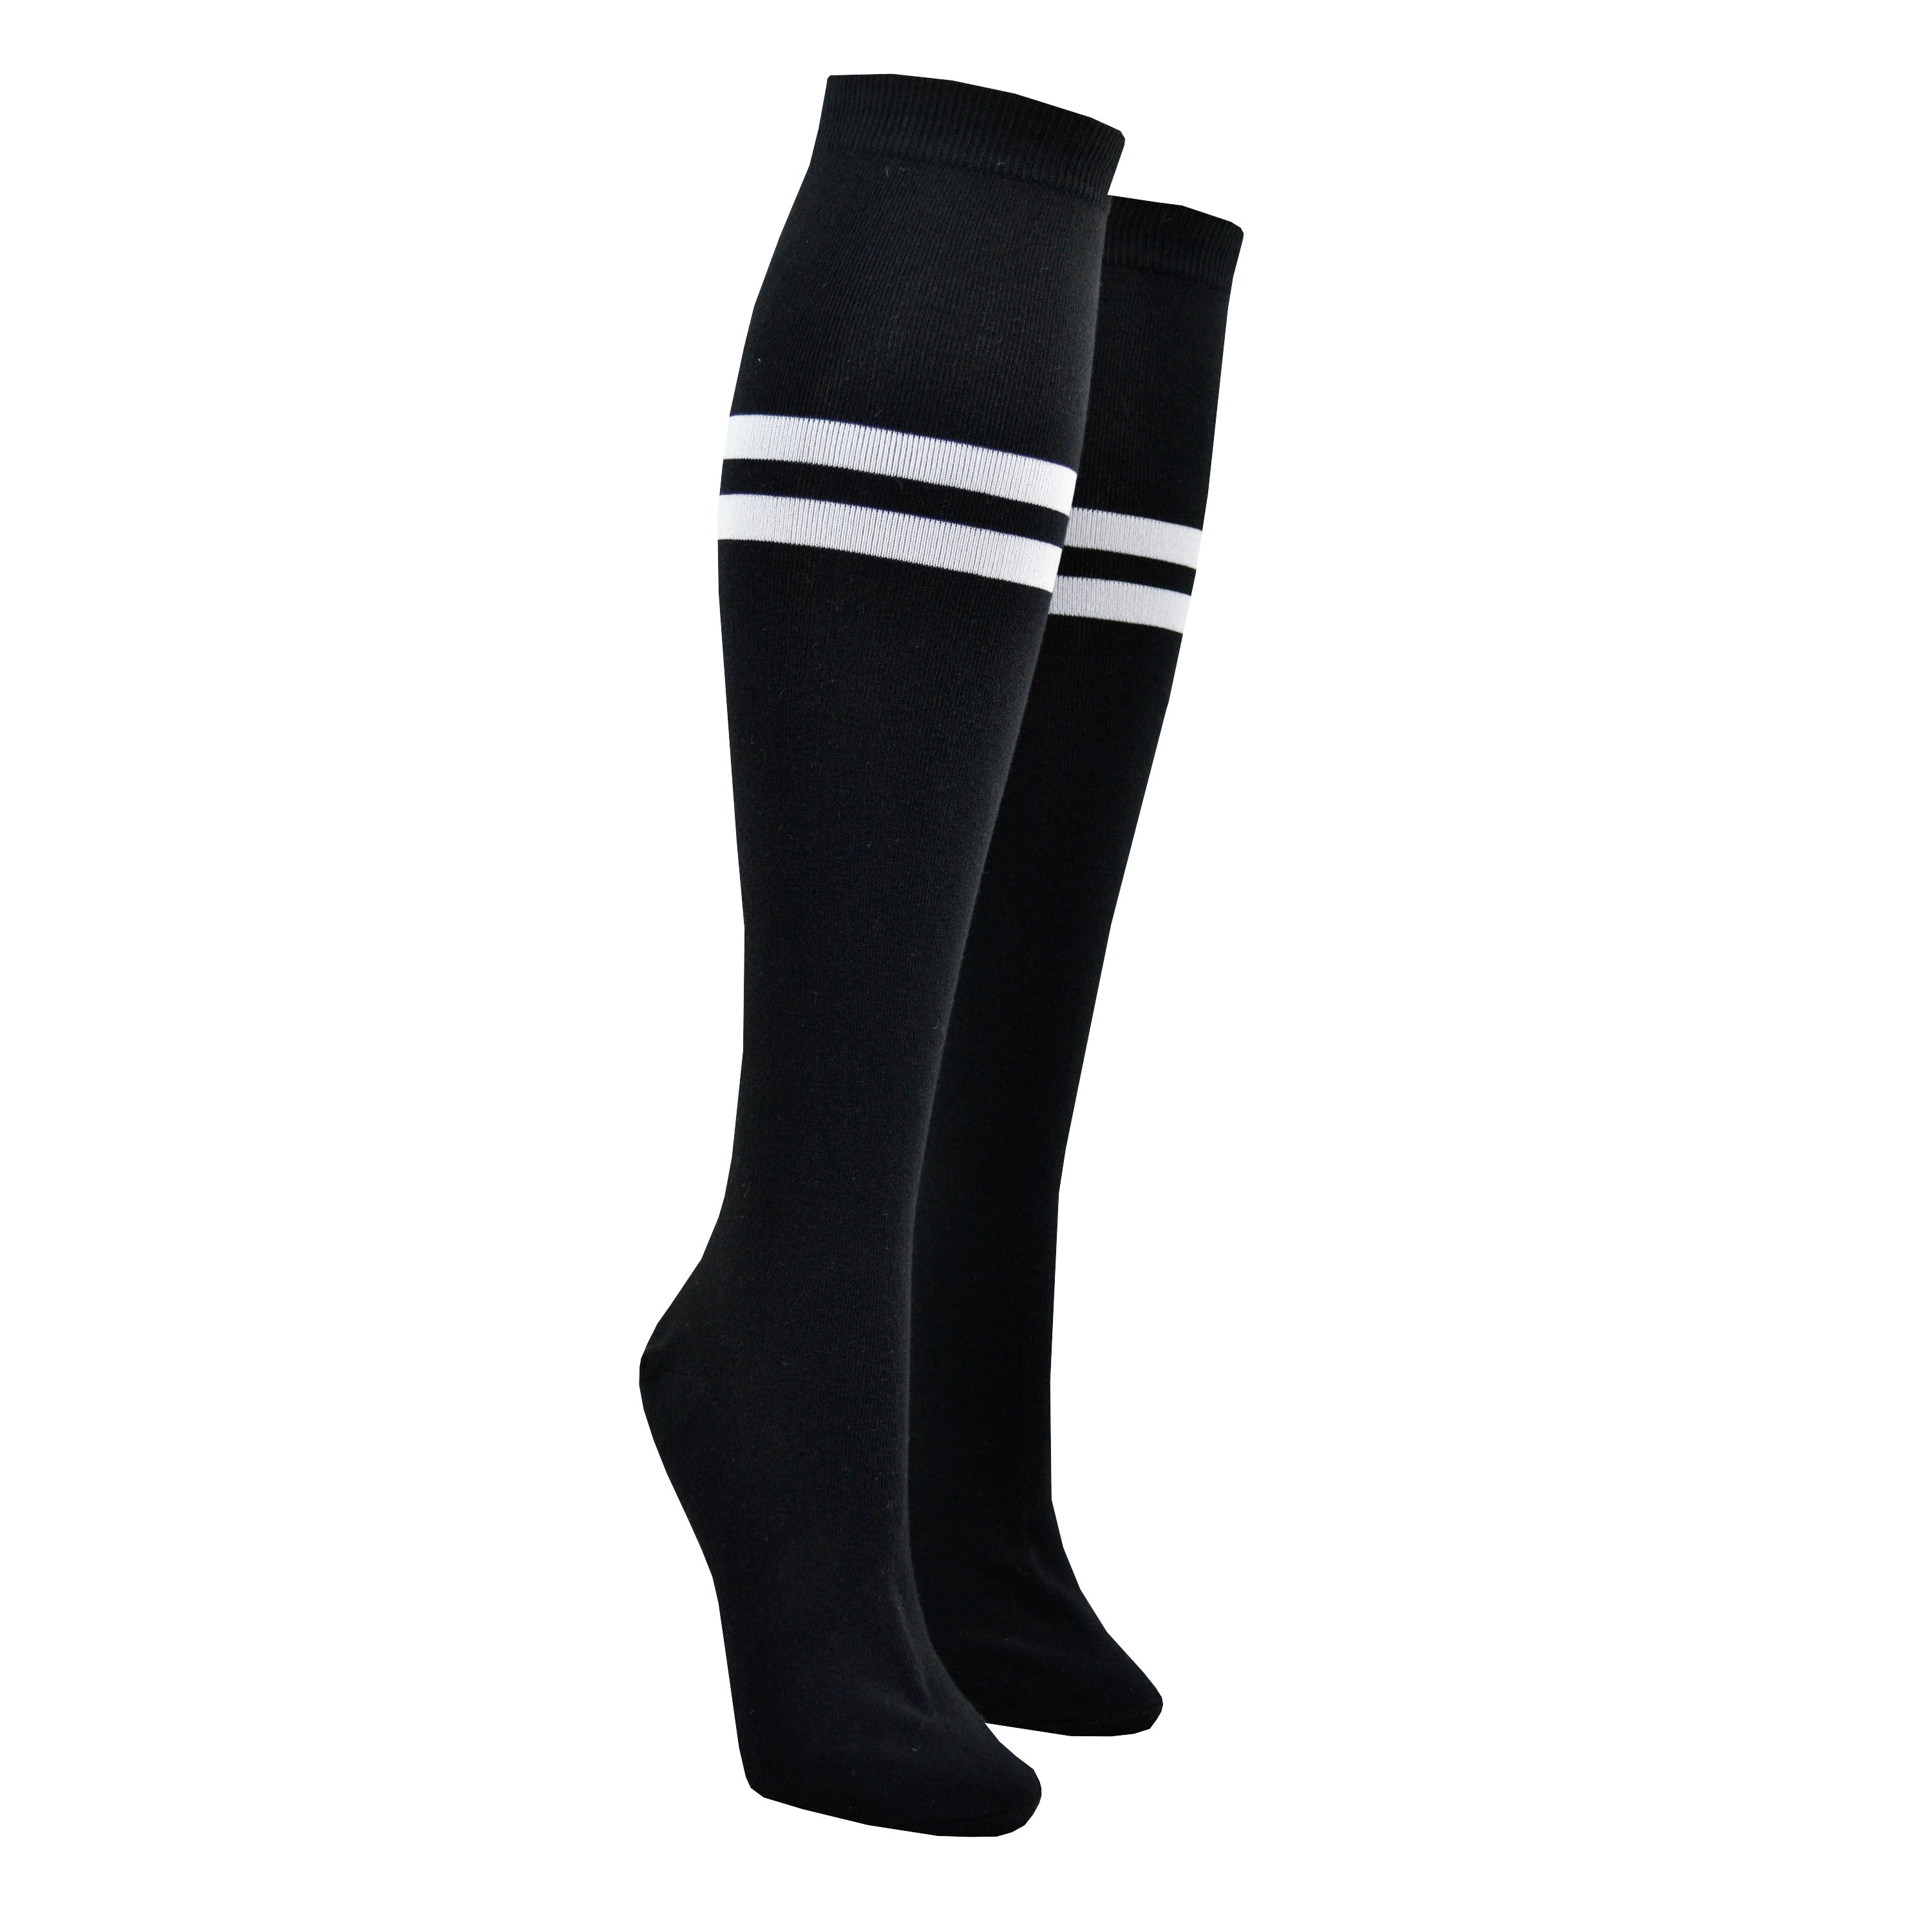 Shown on leg forms, a pair of Sock It To Me brand unisex cotton knee high socks in black with two white stripes around the calf. the back of the sock features a white arrow pointing up to the wearer and says, 